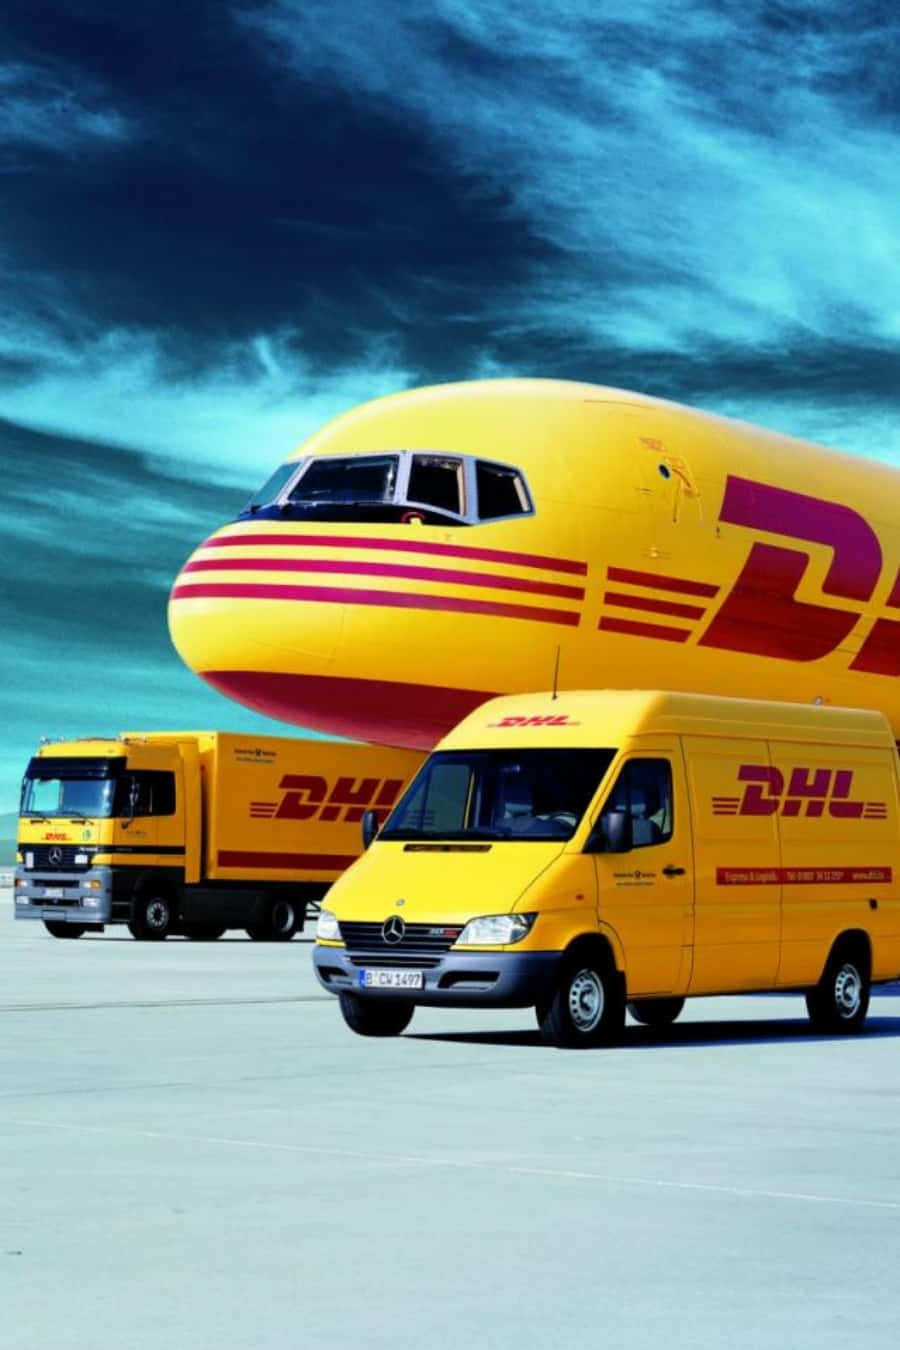 Experience the convenience of doorstep delivery with DHL